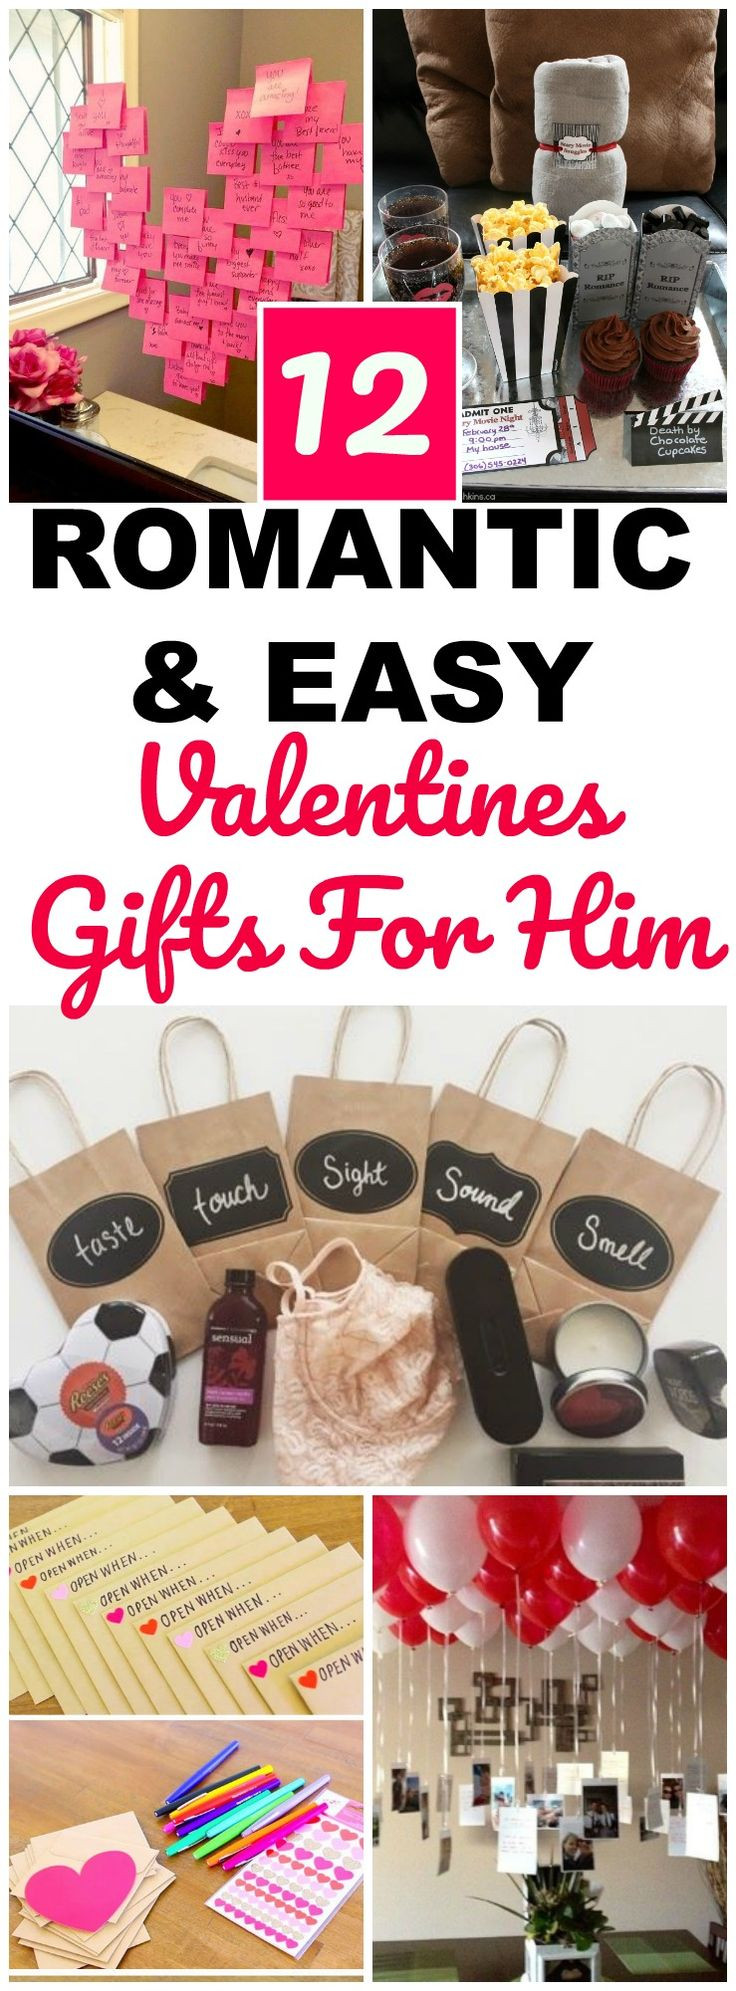 Valentine Gift Ideas For Husband
 The 25 best Boyfriend coupons ideas on Pinterest